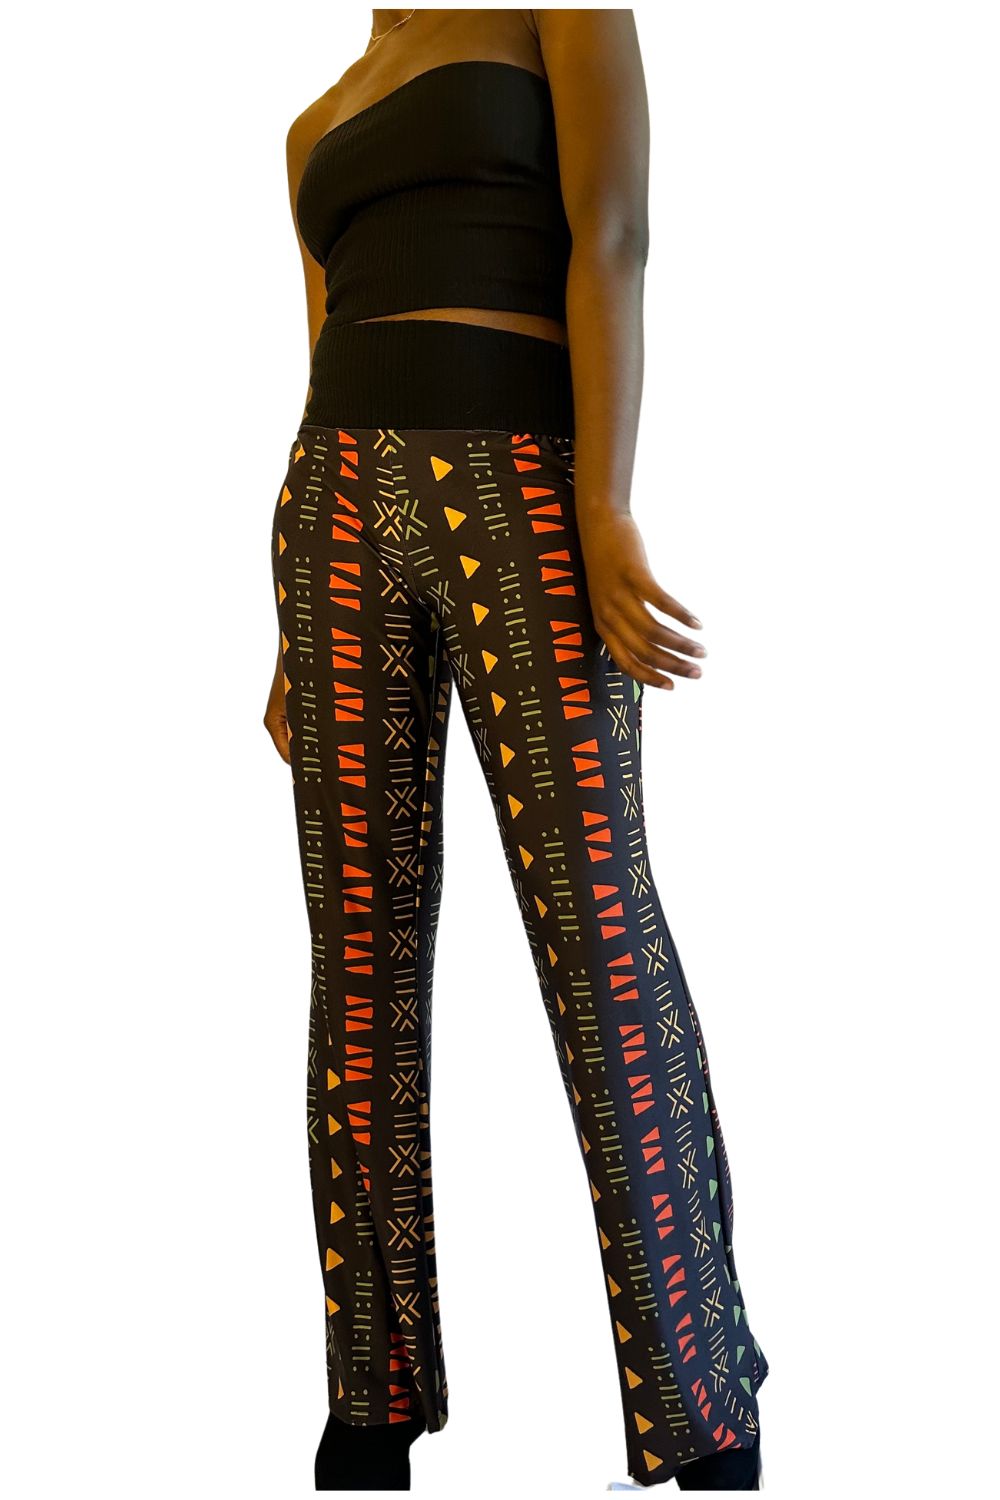 African Lineage Boot Leg Pants